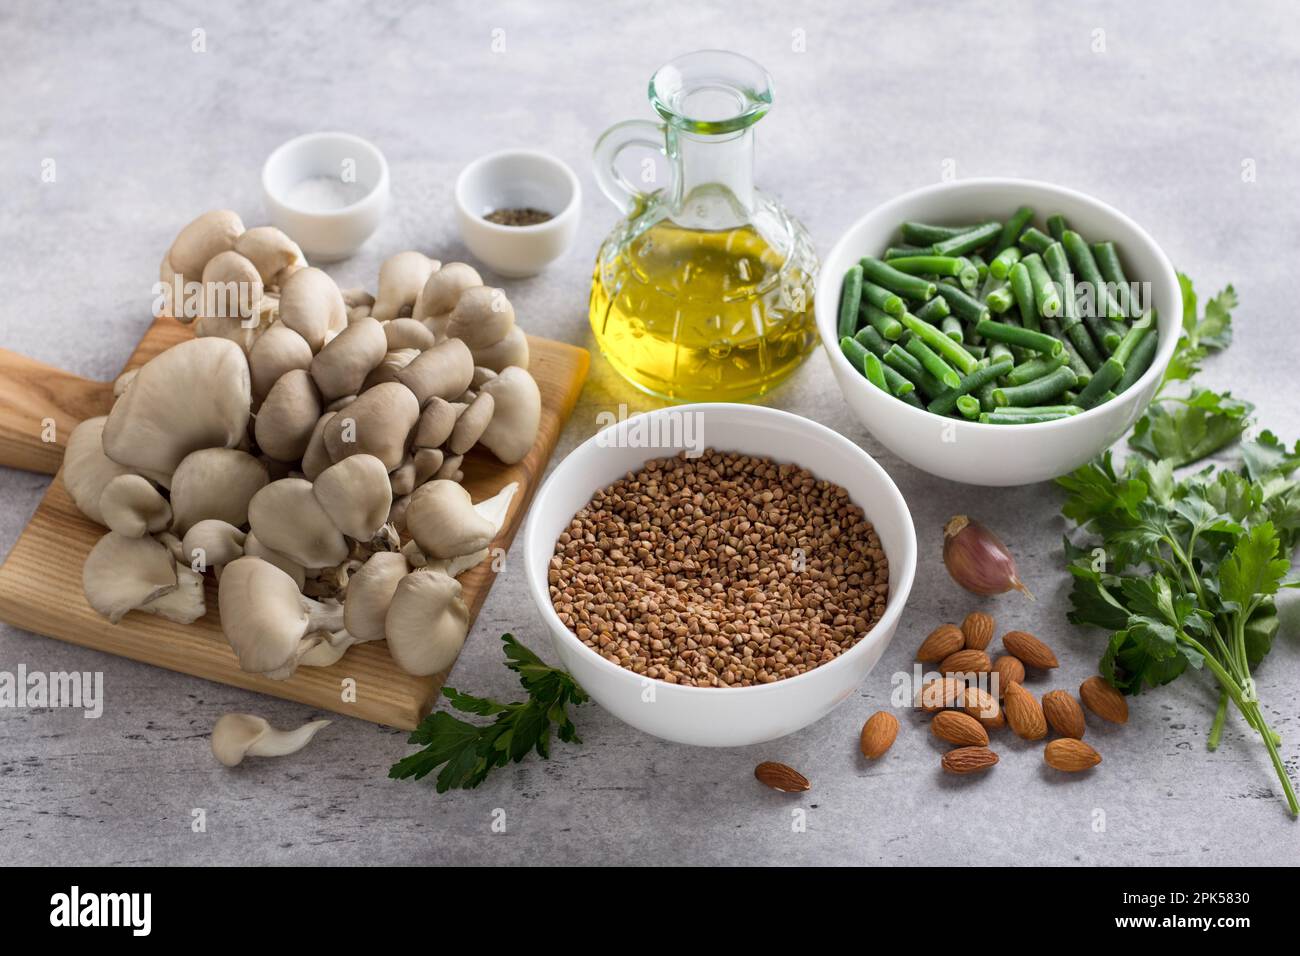 Ingredients for a vegetable vegan dish: buckwheat, oyster mushrooms, green beans, almonds, olive oil, parsley, garlic and spices on a gray background, Stock Photo